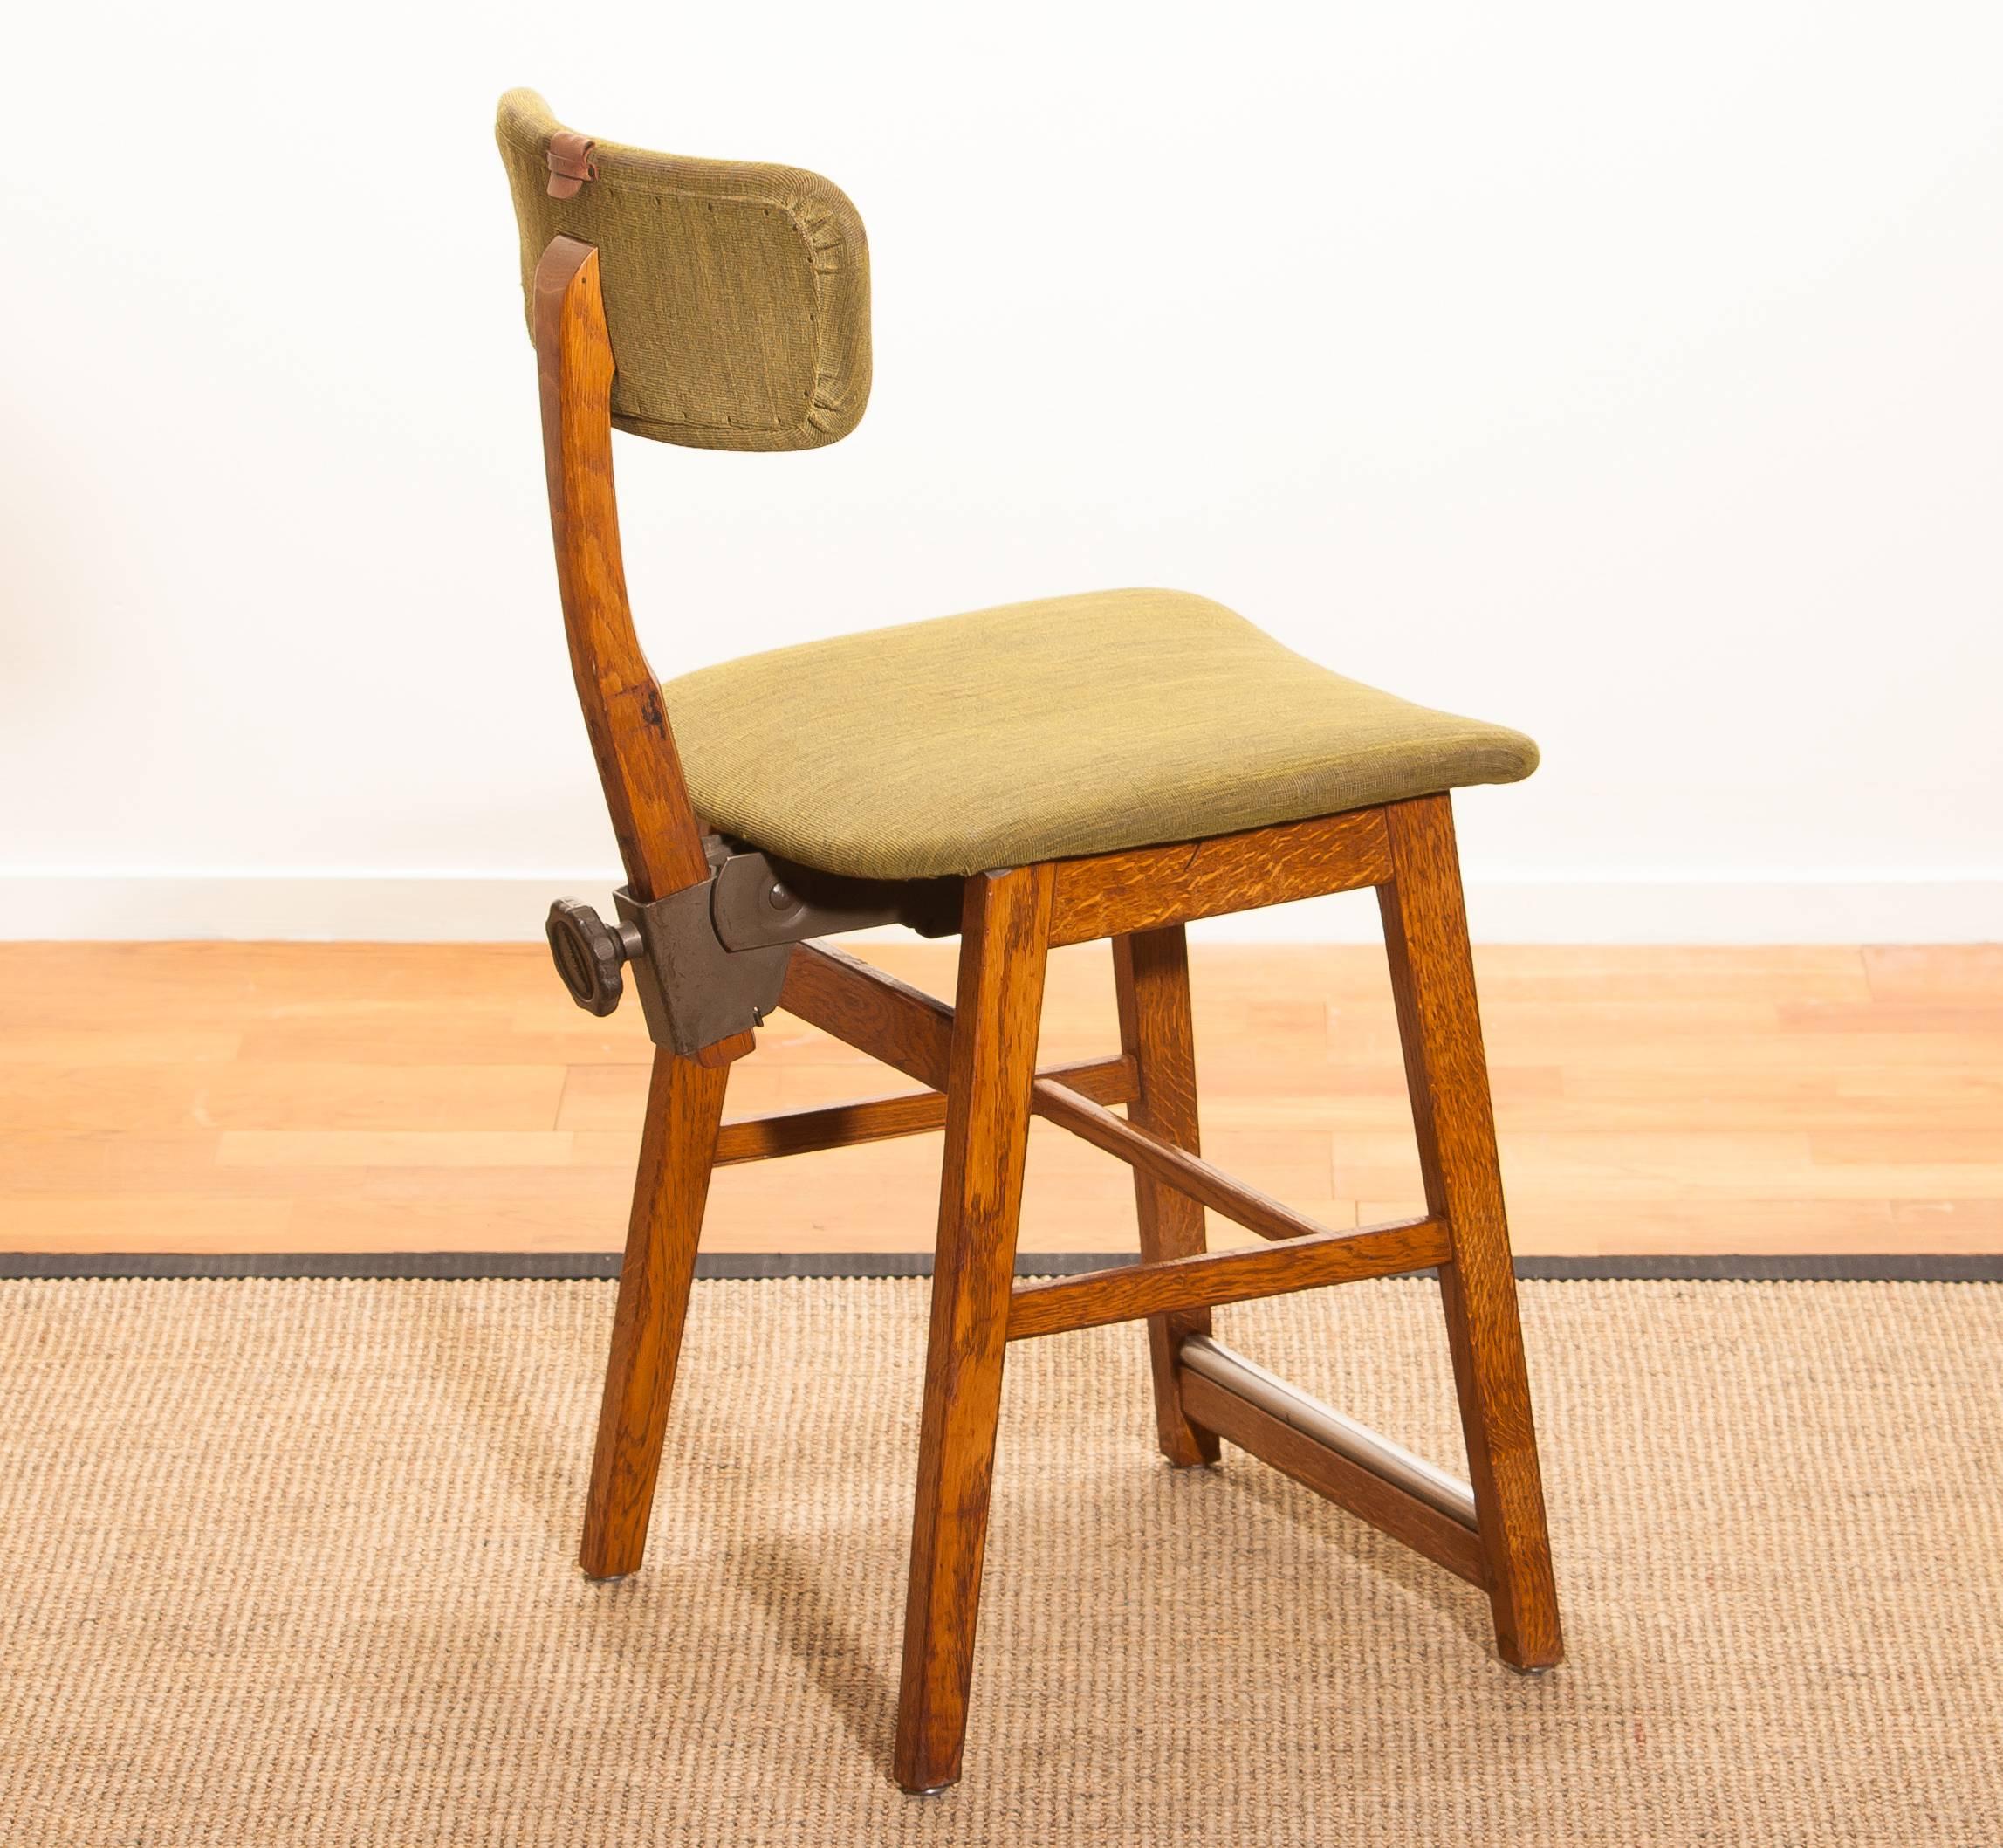 1960s, Teak and Wool Desk Chair by Âtvidabergs Sweden 3